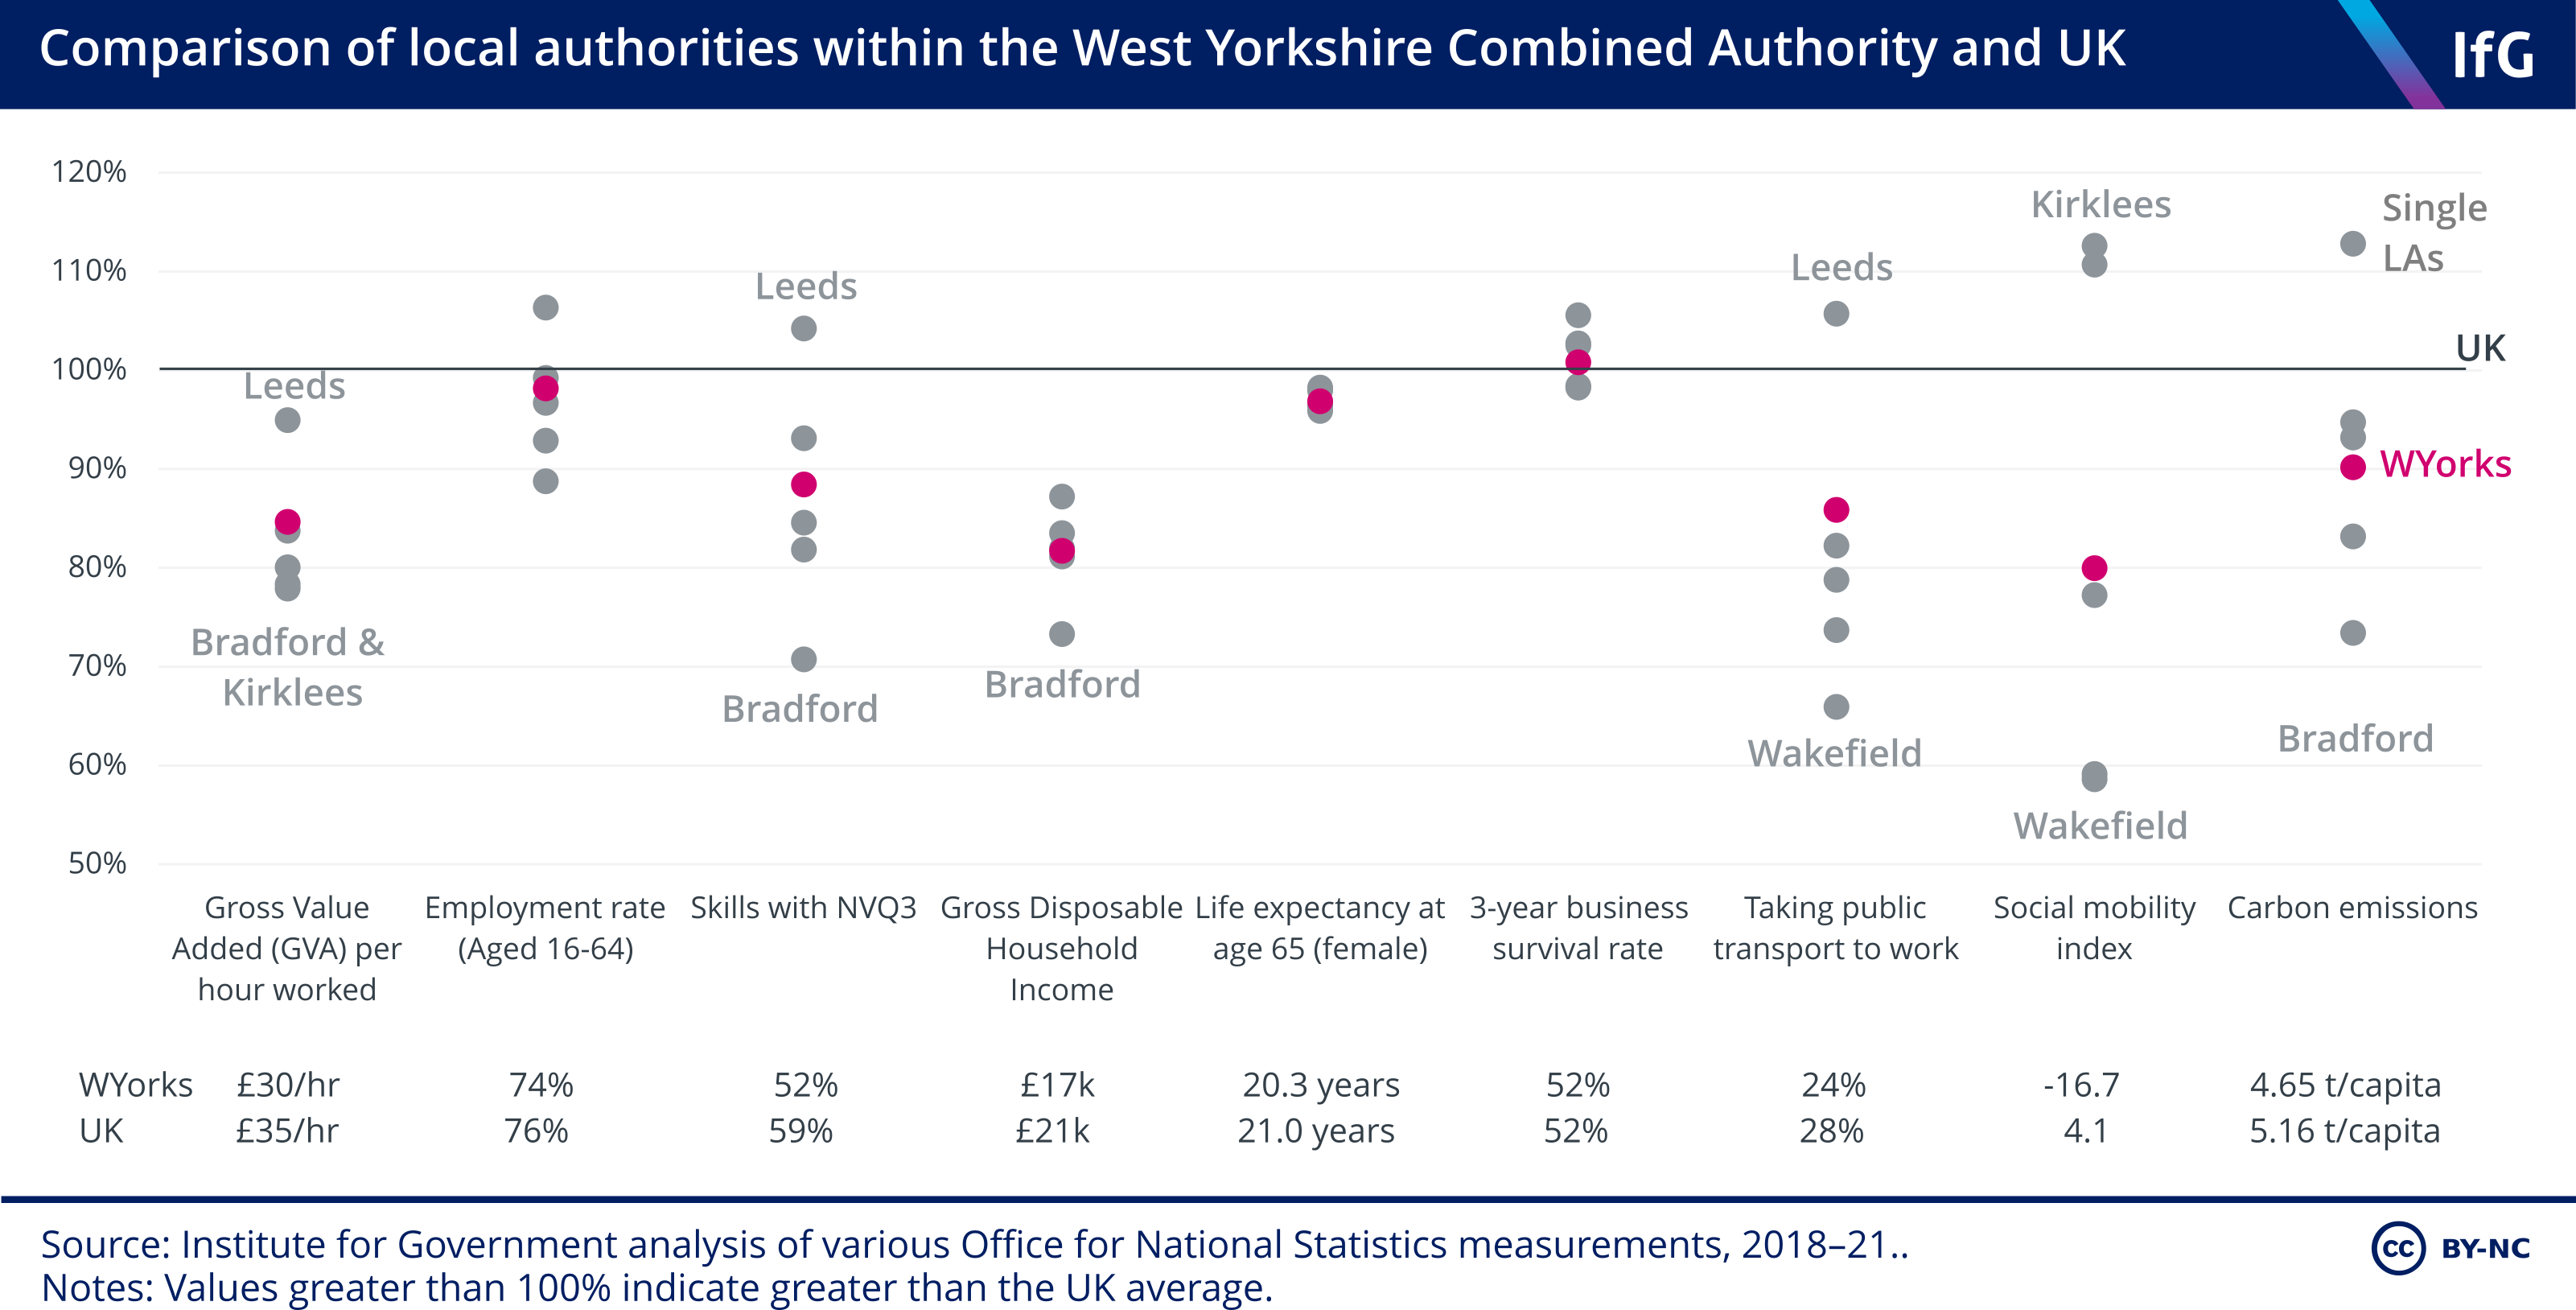 Comparison of local authorities within the West Yorkshire Combined Authority and UK